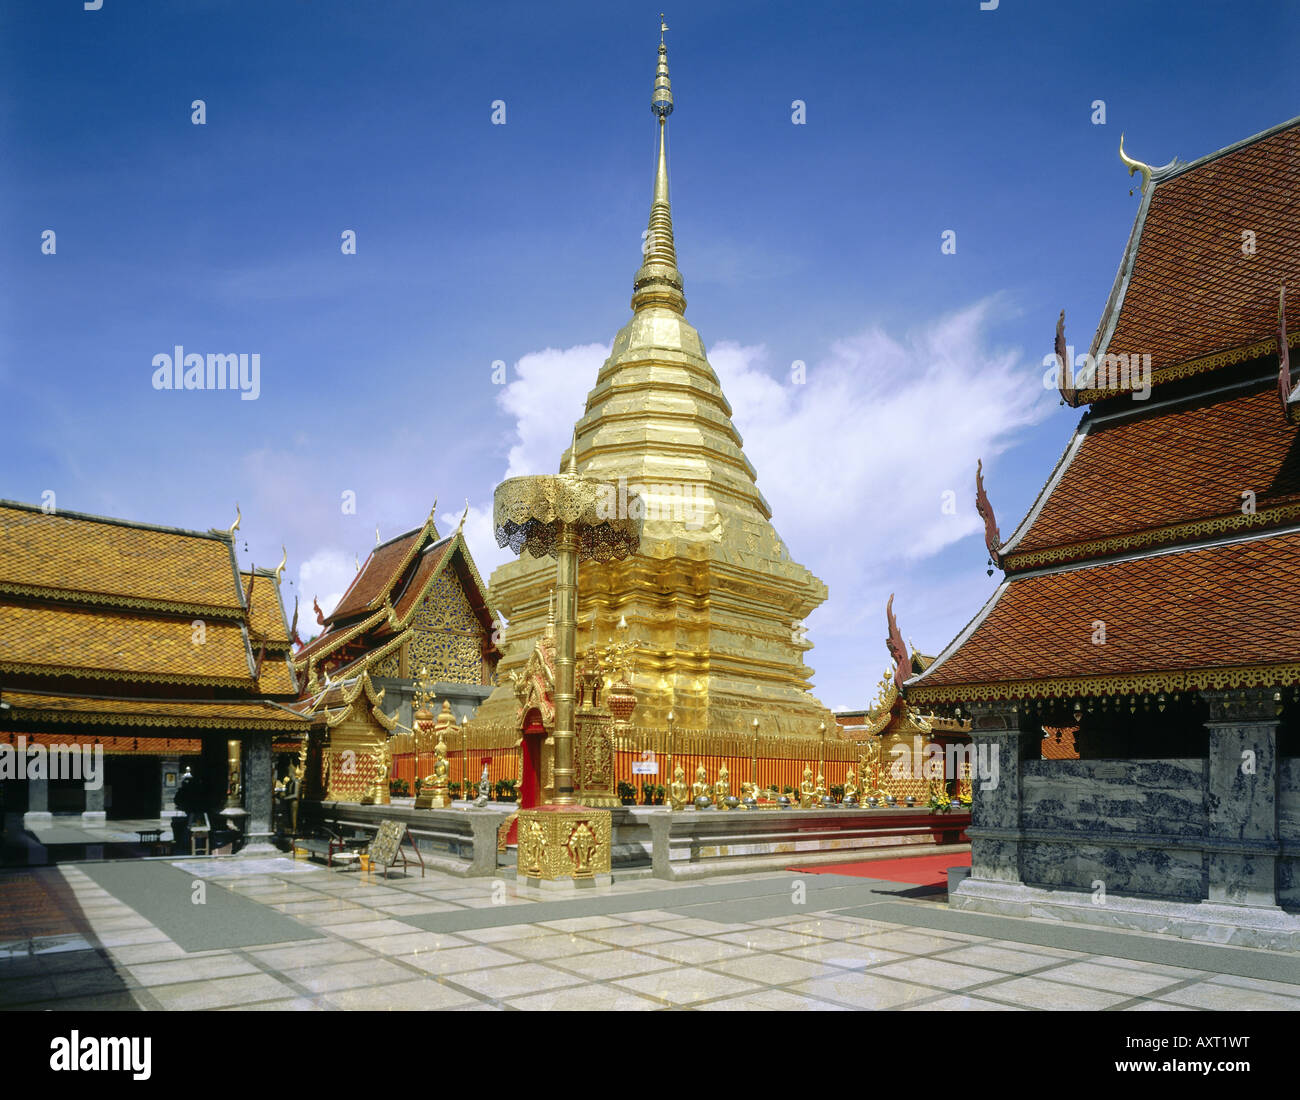 geography / travel, Thailand, cloisters, cloister Wat Doi Suthep, golden Chedi at Chiang May, exterior view, gold Stock Photo